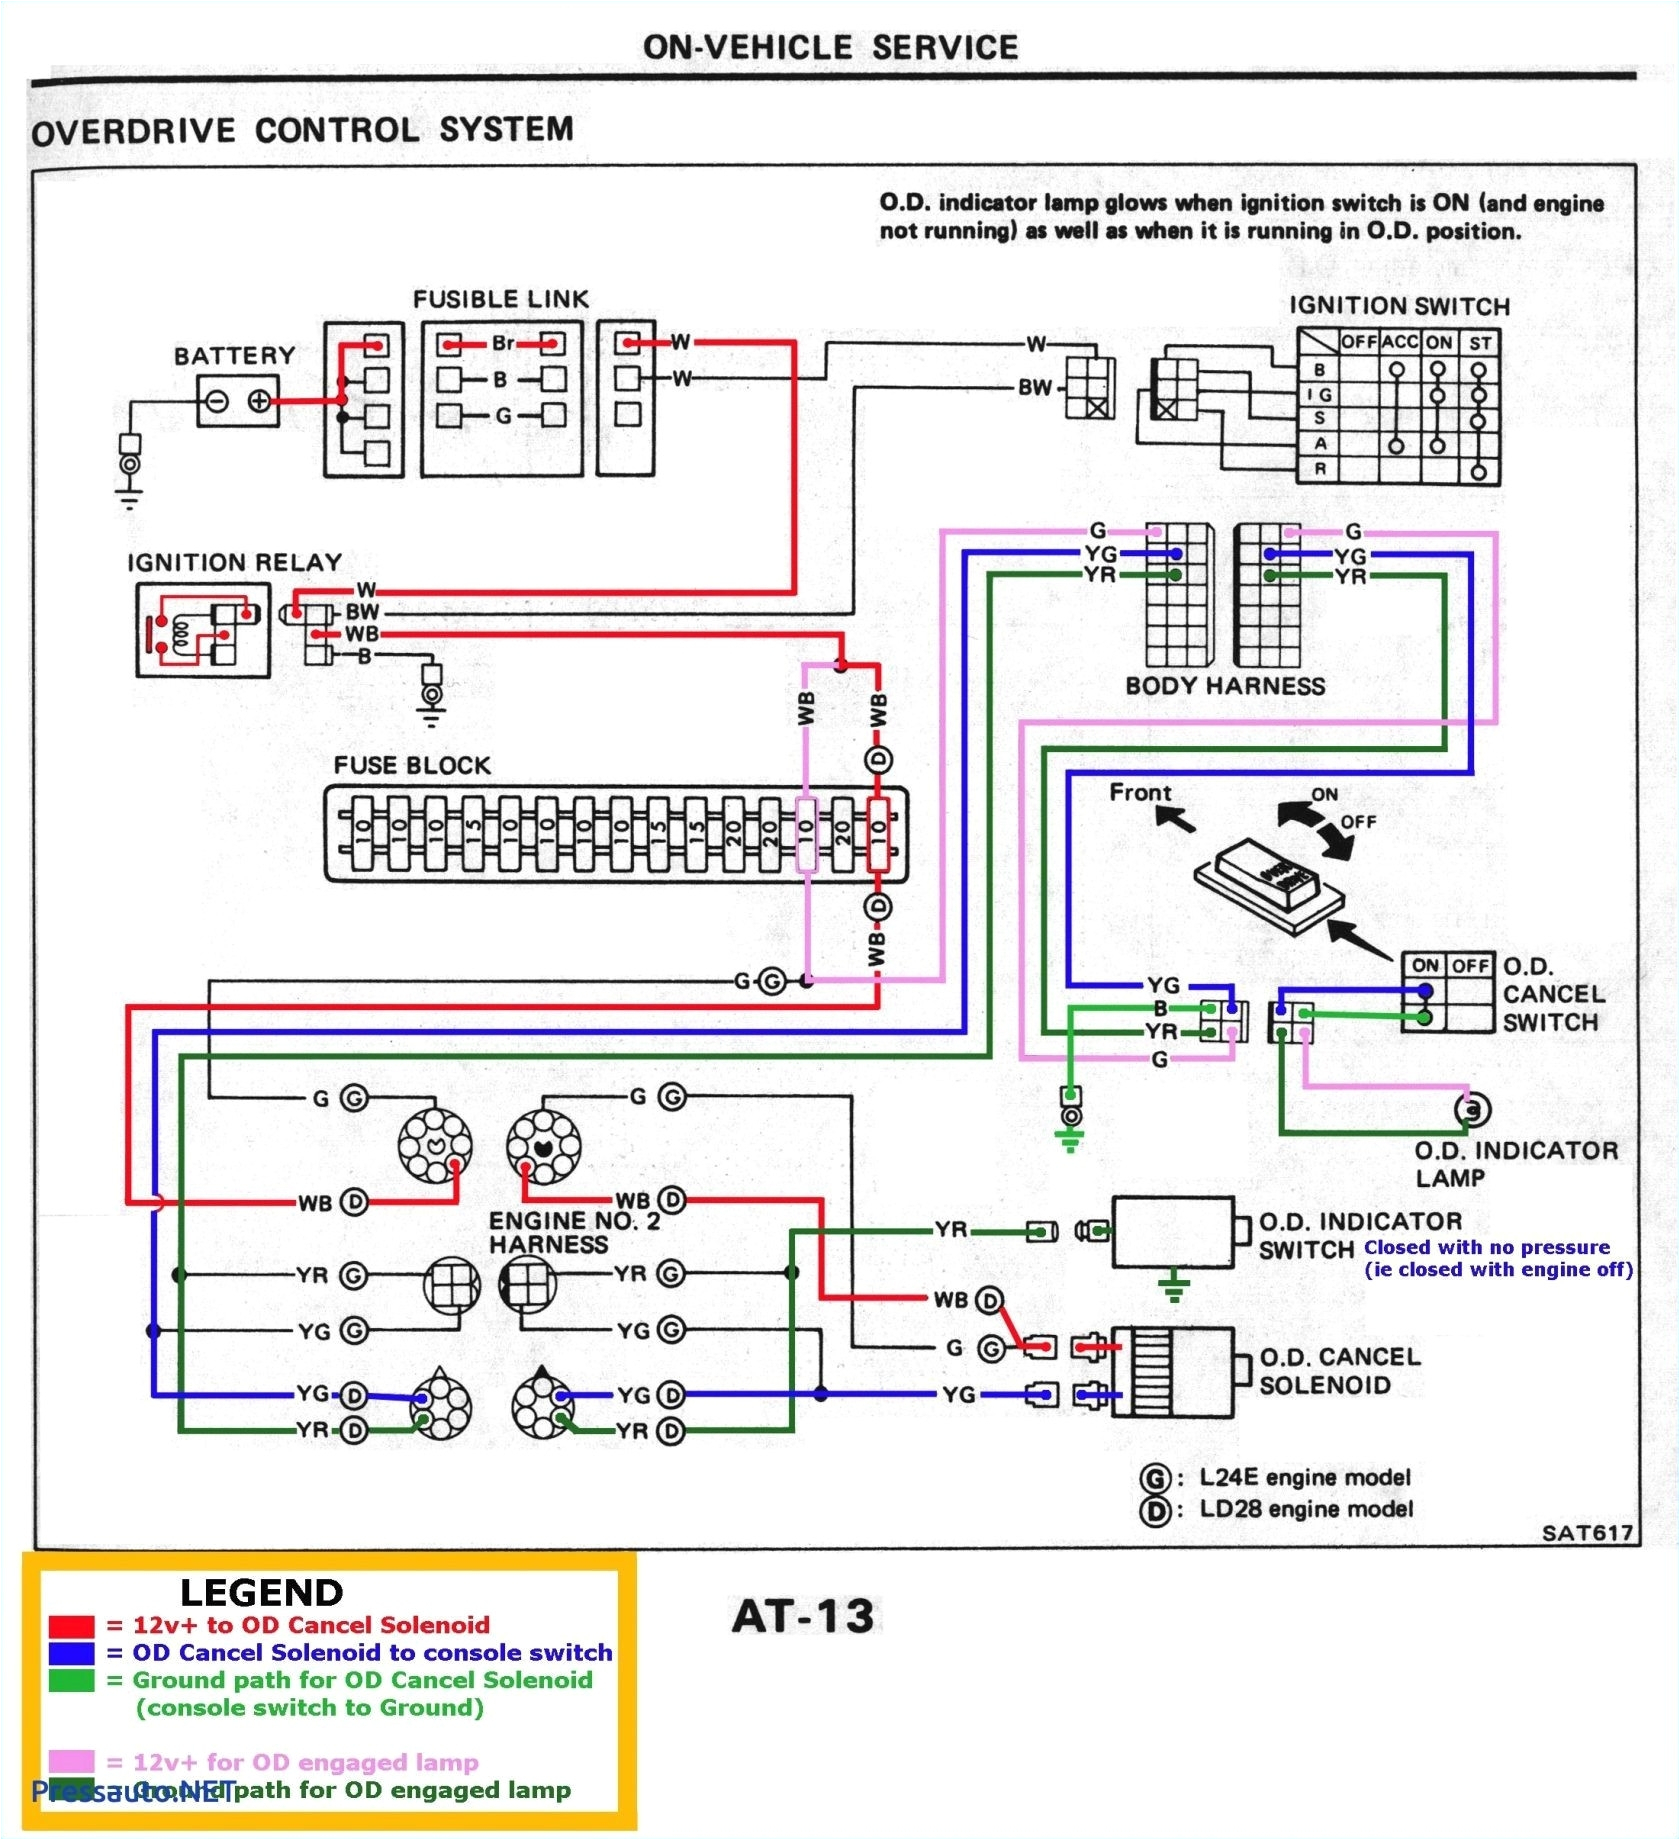 old ramsey winch wiring diagram wiring diagram centreramsey winch wiring diagram wiring diagram toolboxramsey winch solenoid